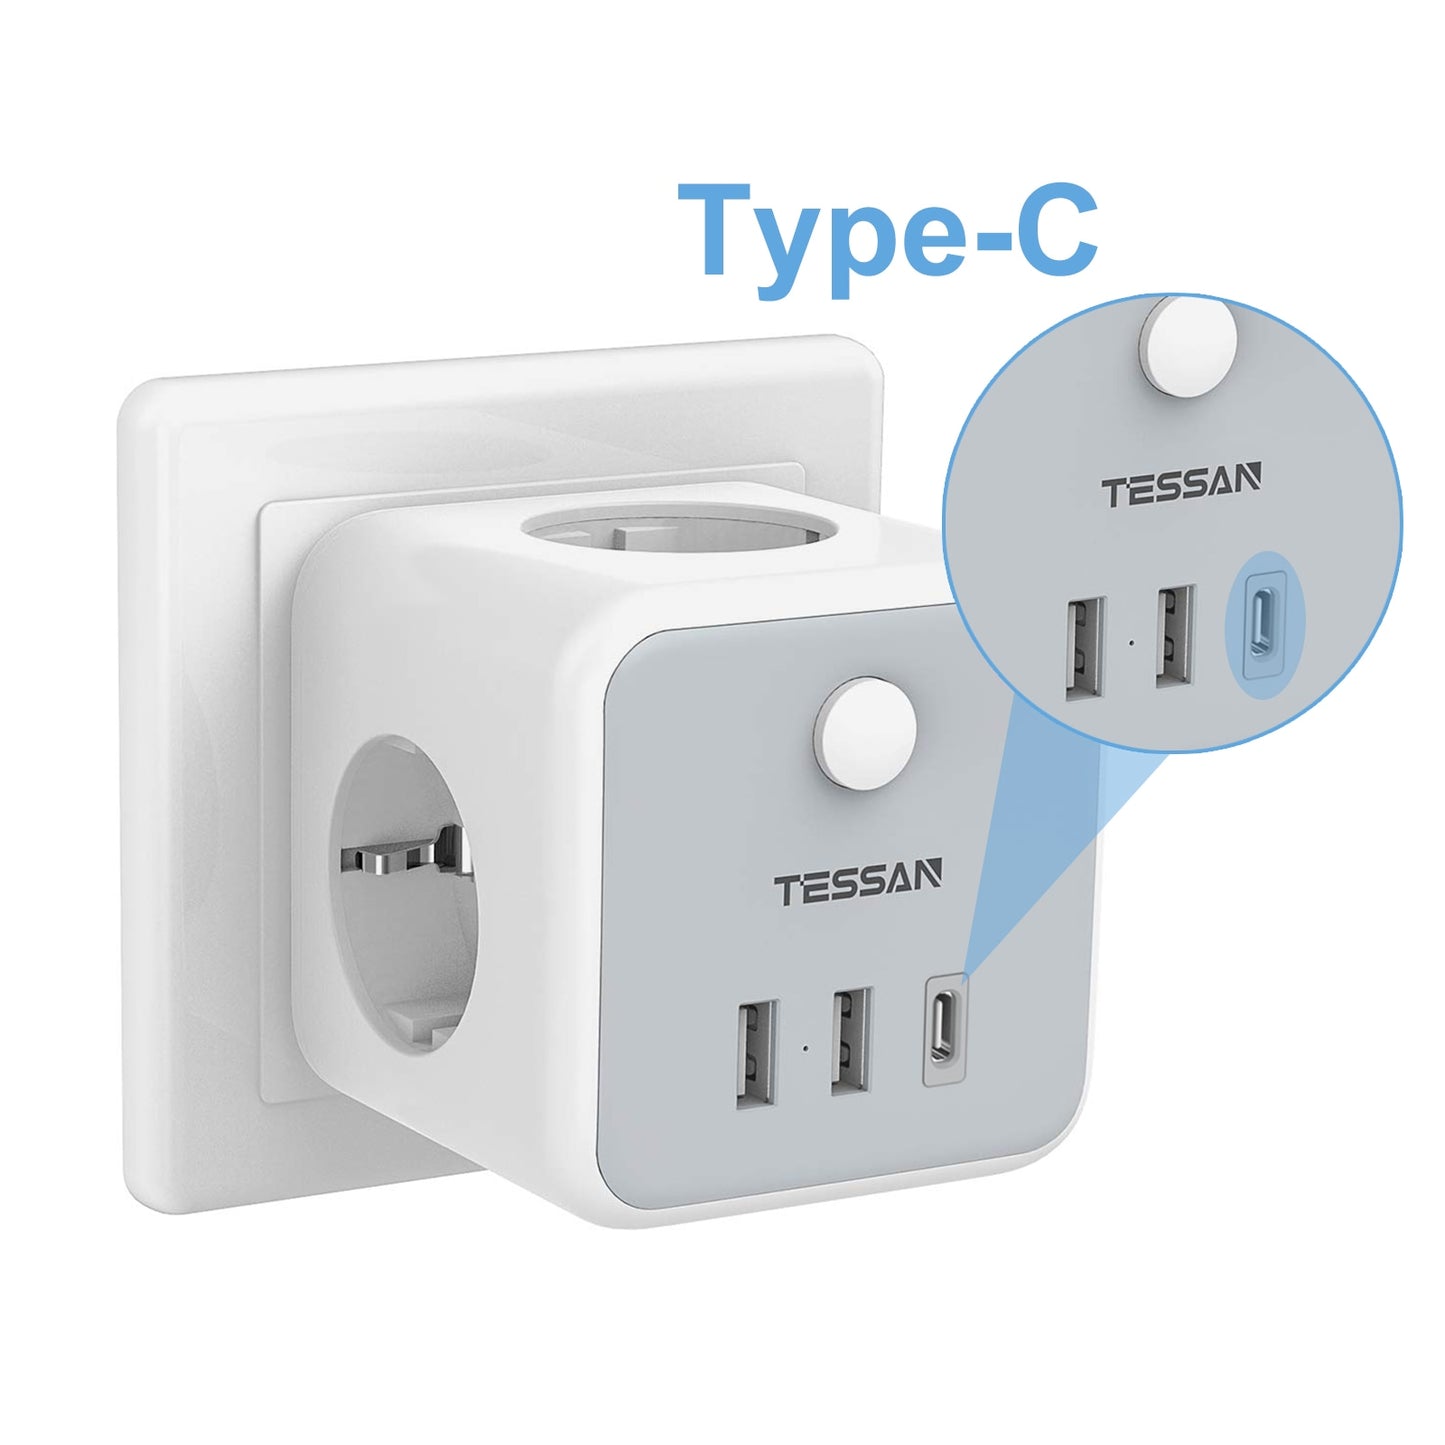 TESSAN EU Plug Power Strip with Switch On/Off 3 AC Outlets 3 USB Charging Ports 5V 2.4A Portable Multi Socket Power Adapter